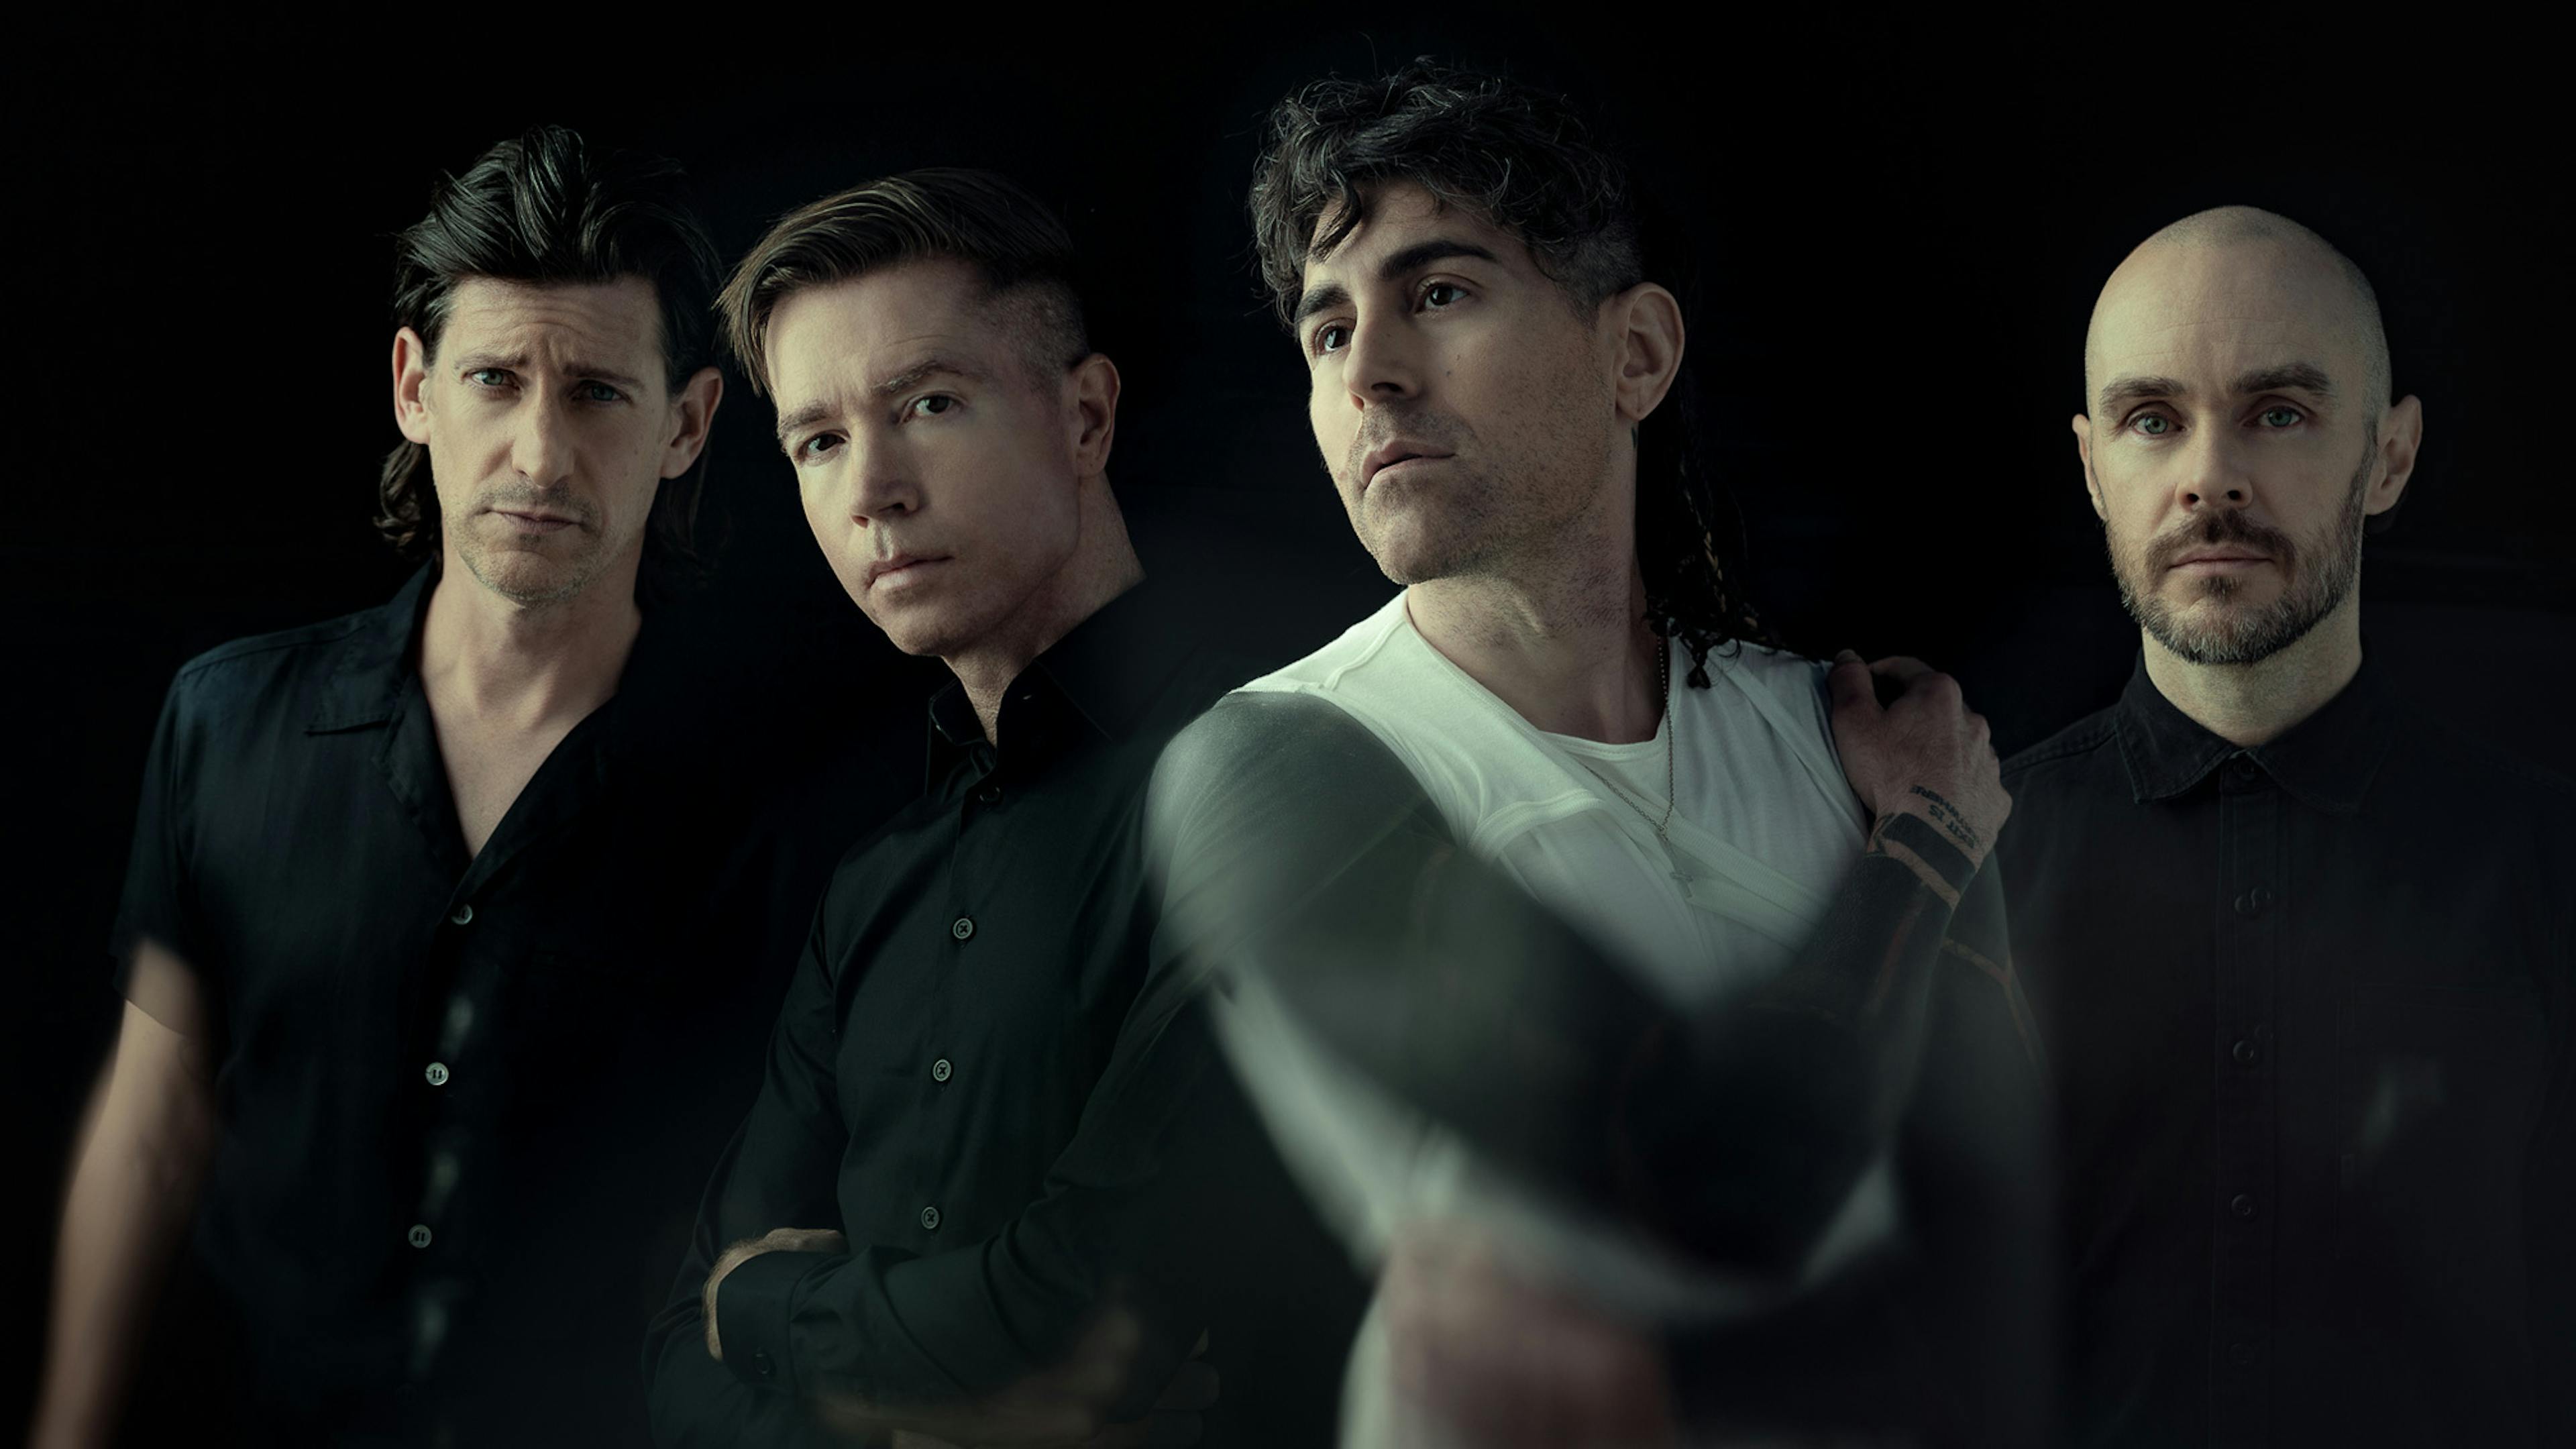 AFI have released two new songs, Twisted Tongues and Escape From Los Angeles